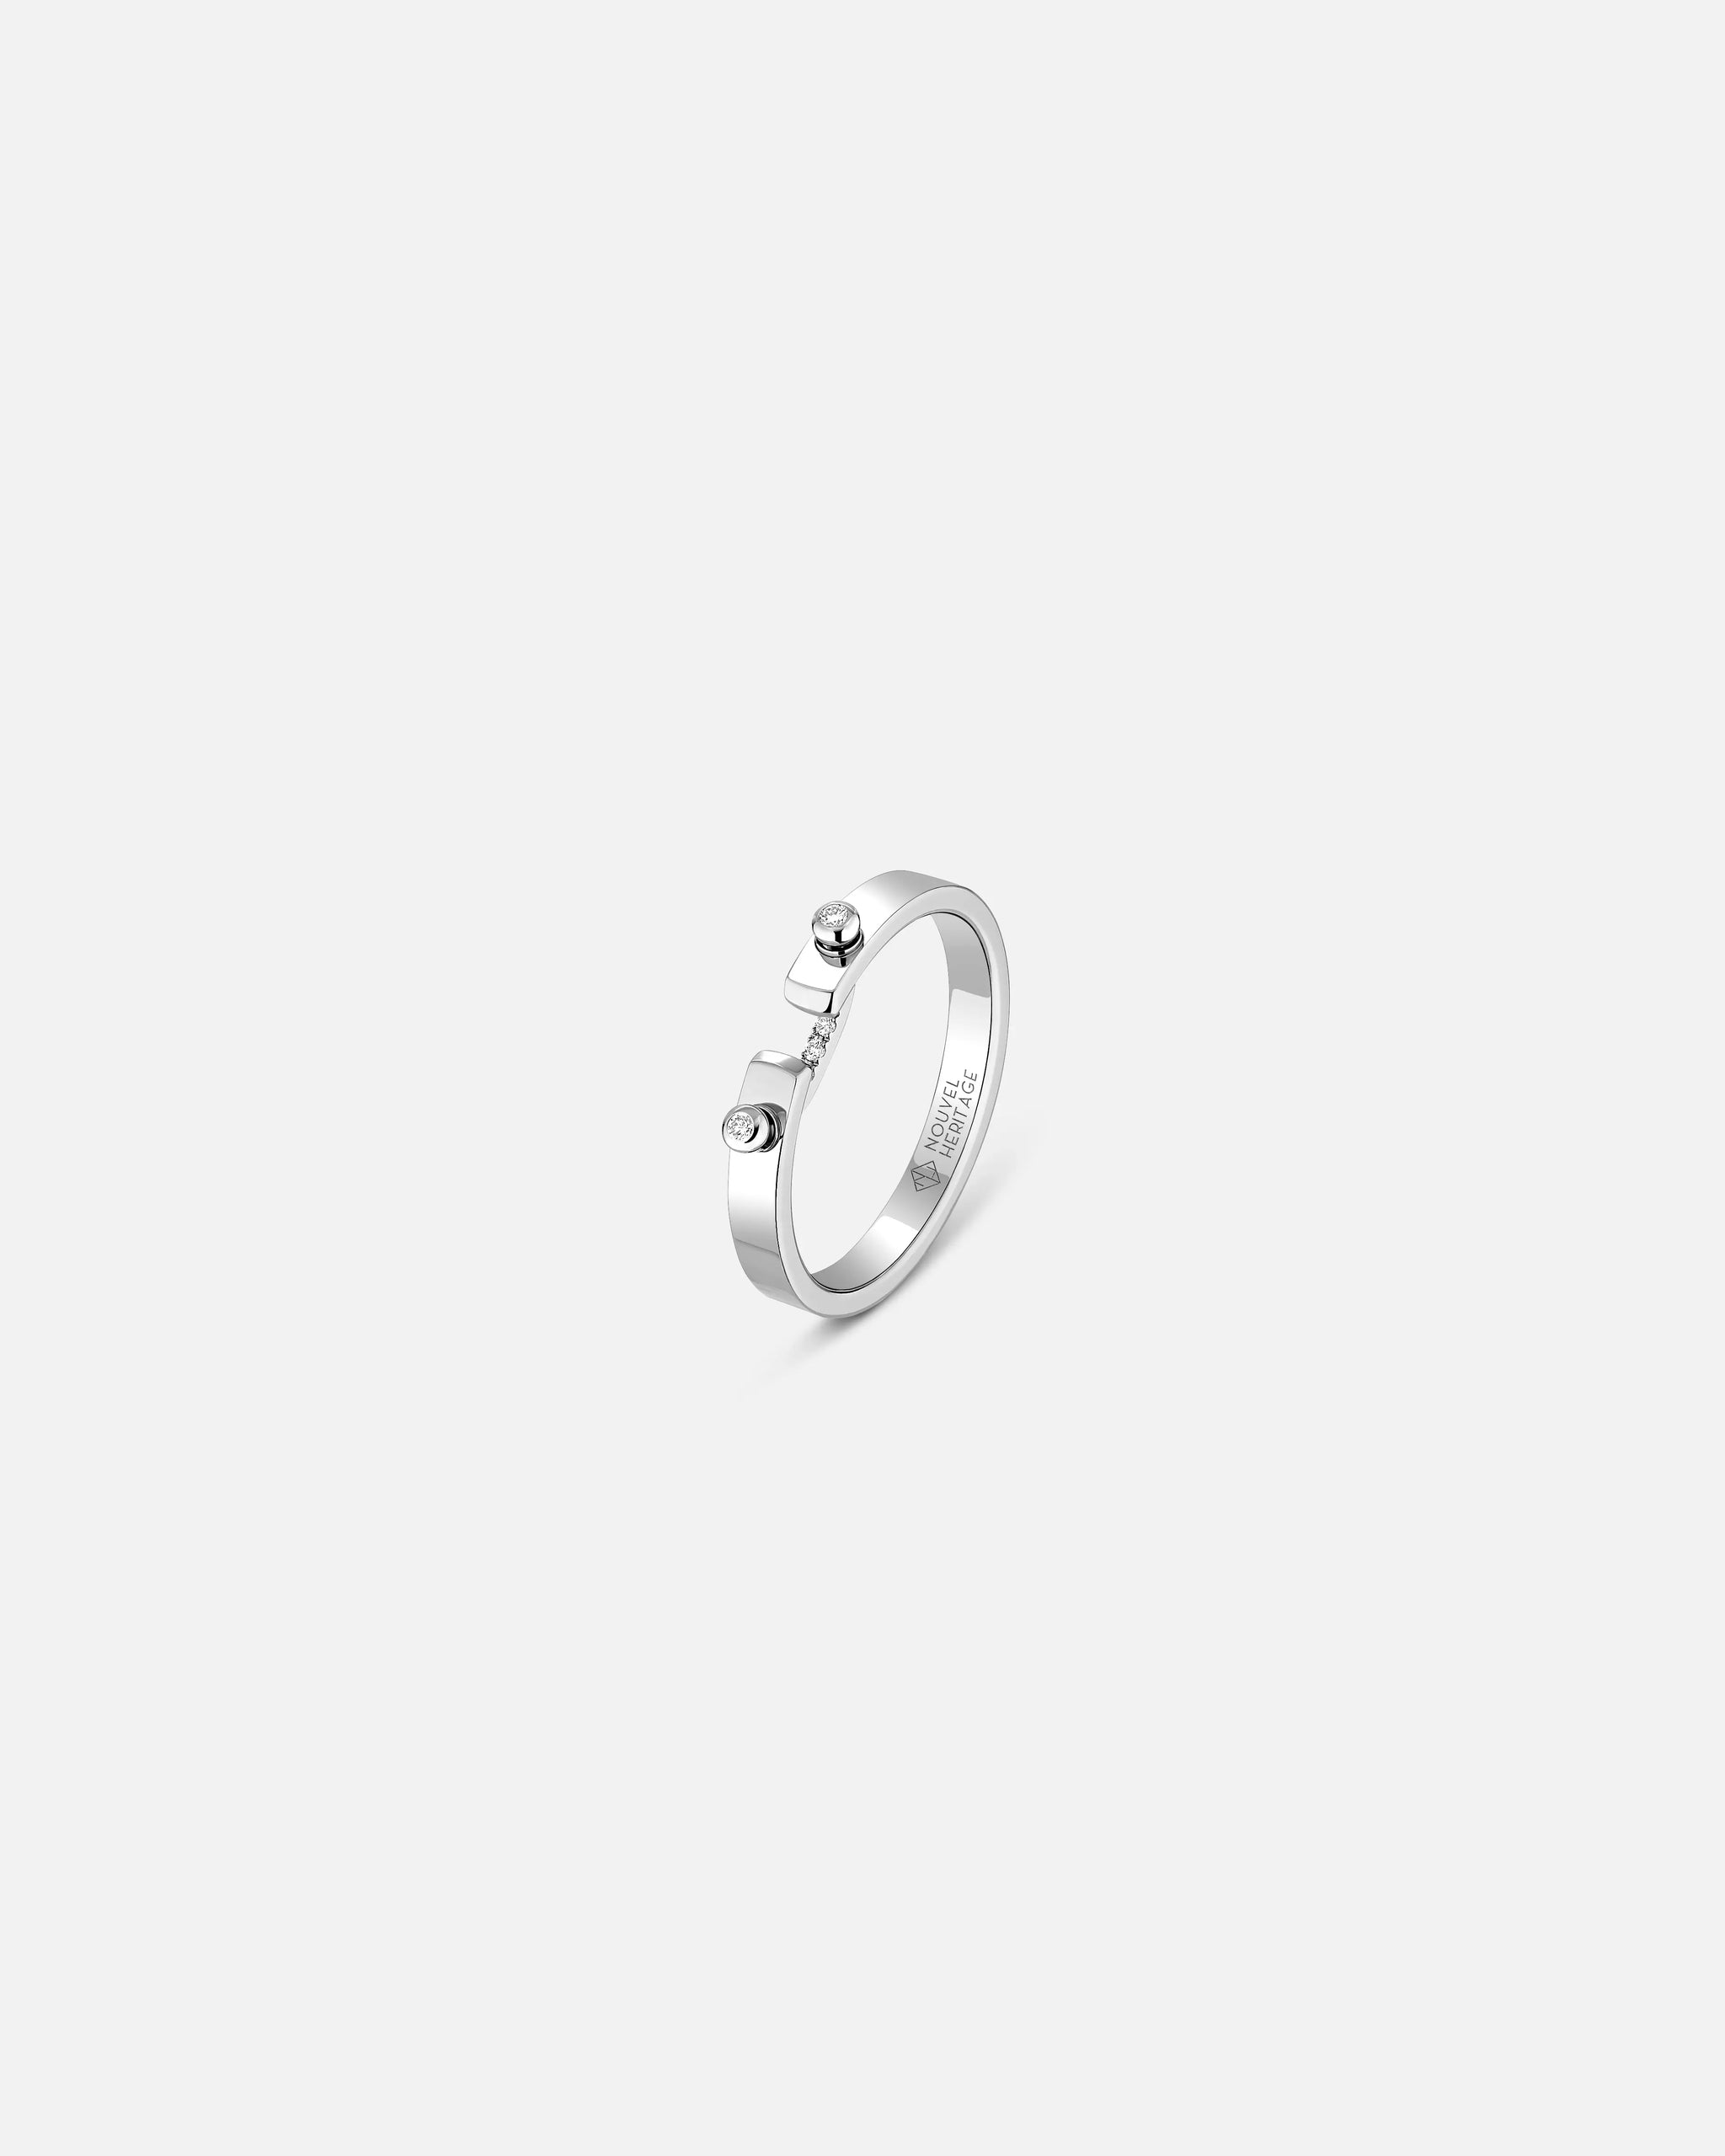 Business Meeting PM Mood Ring in White Gold - 1 - Nouvel Heritage